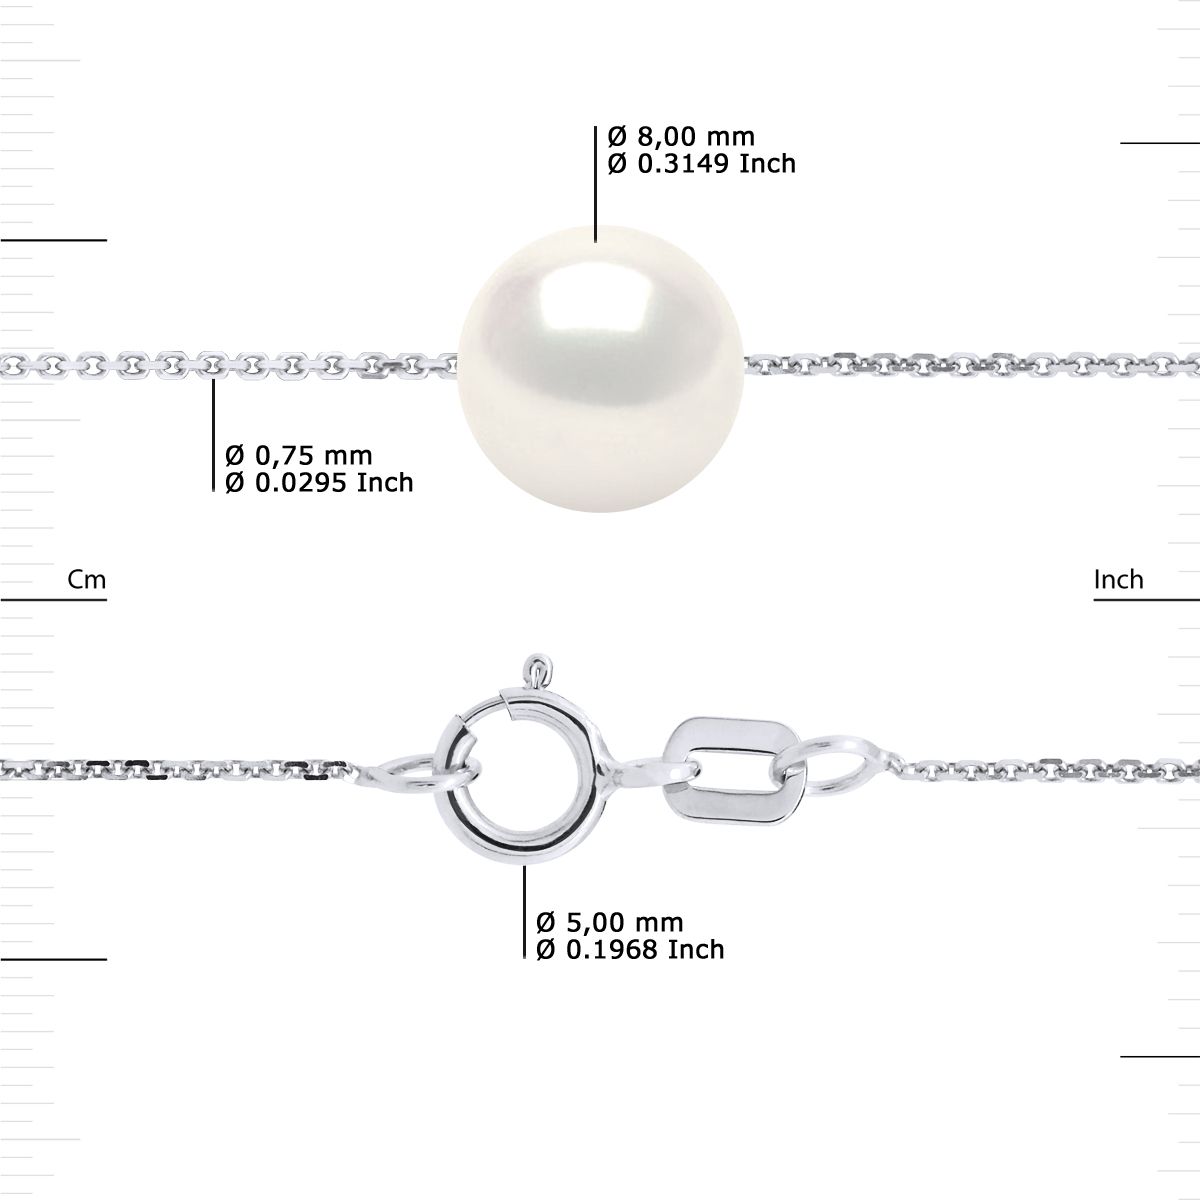 Necklace of true Cultured Freshwater Pearls 9-10 mm - Natural White Color and chain mesh 925 Sterling Silver Rhodium-plated Length 42 cm , 16,5 in - Our jewellery is made in France and will be delivered in a gift box accompanied by a Certificate of Authenticity and International Warranty